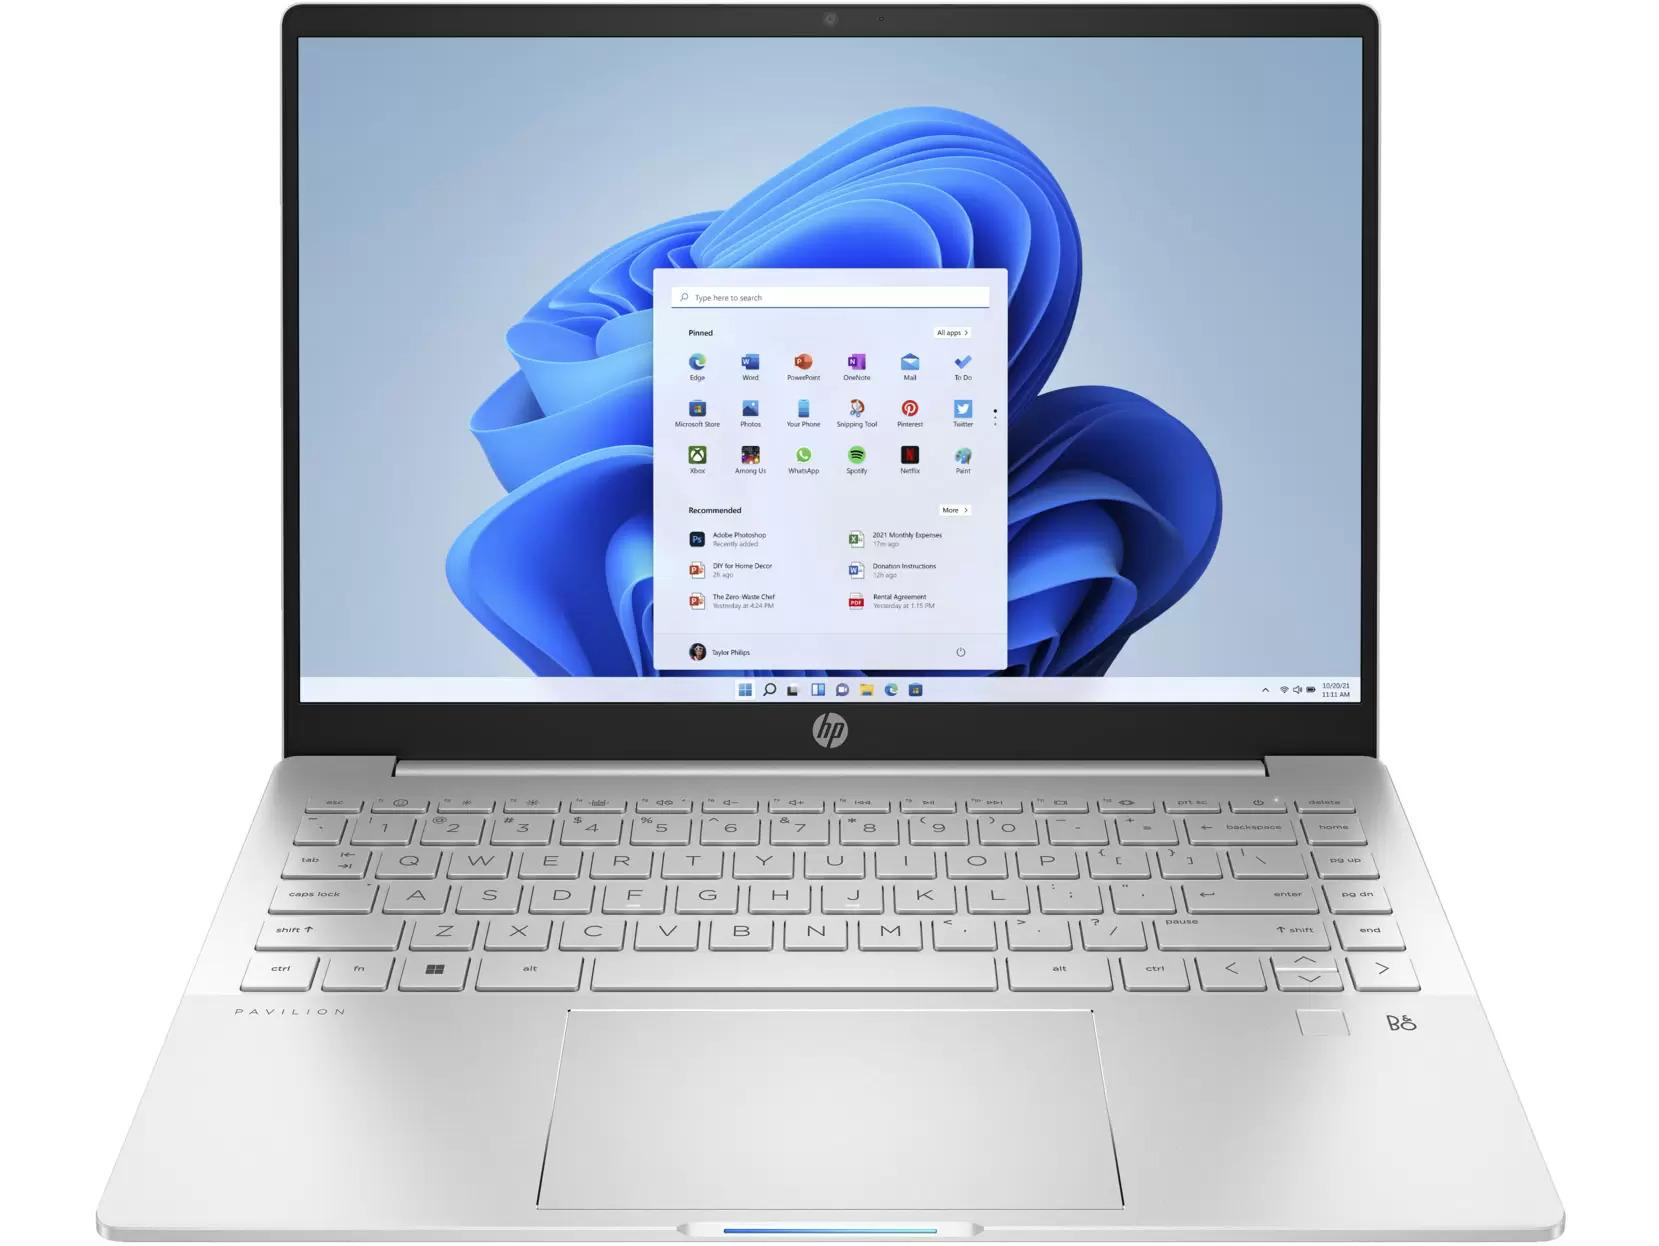 HP Pavilion Plus Laptop 14t i5 16GB 256GB Notebook Laptop for $588.99 Shipped